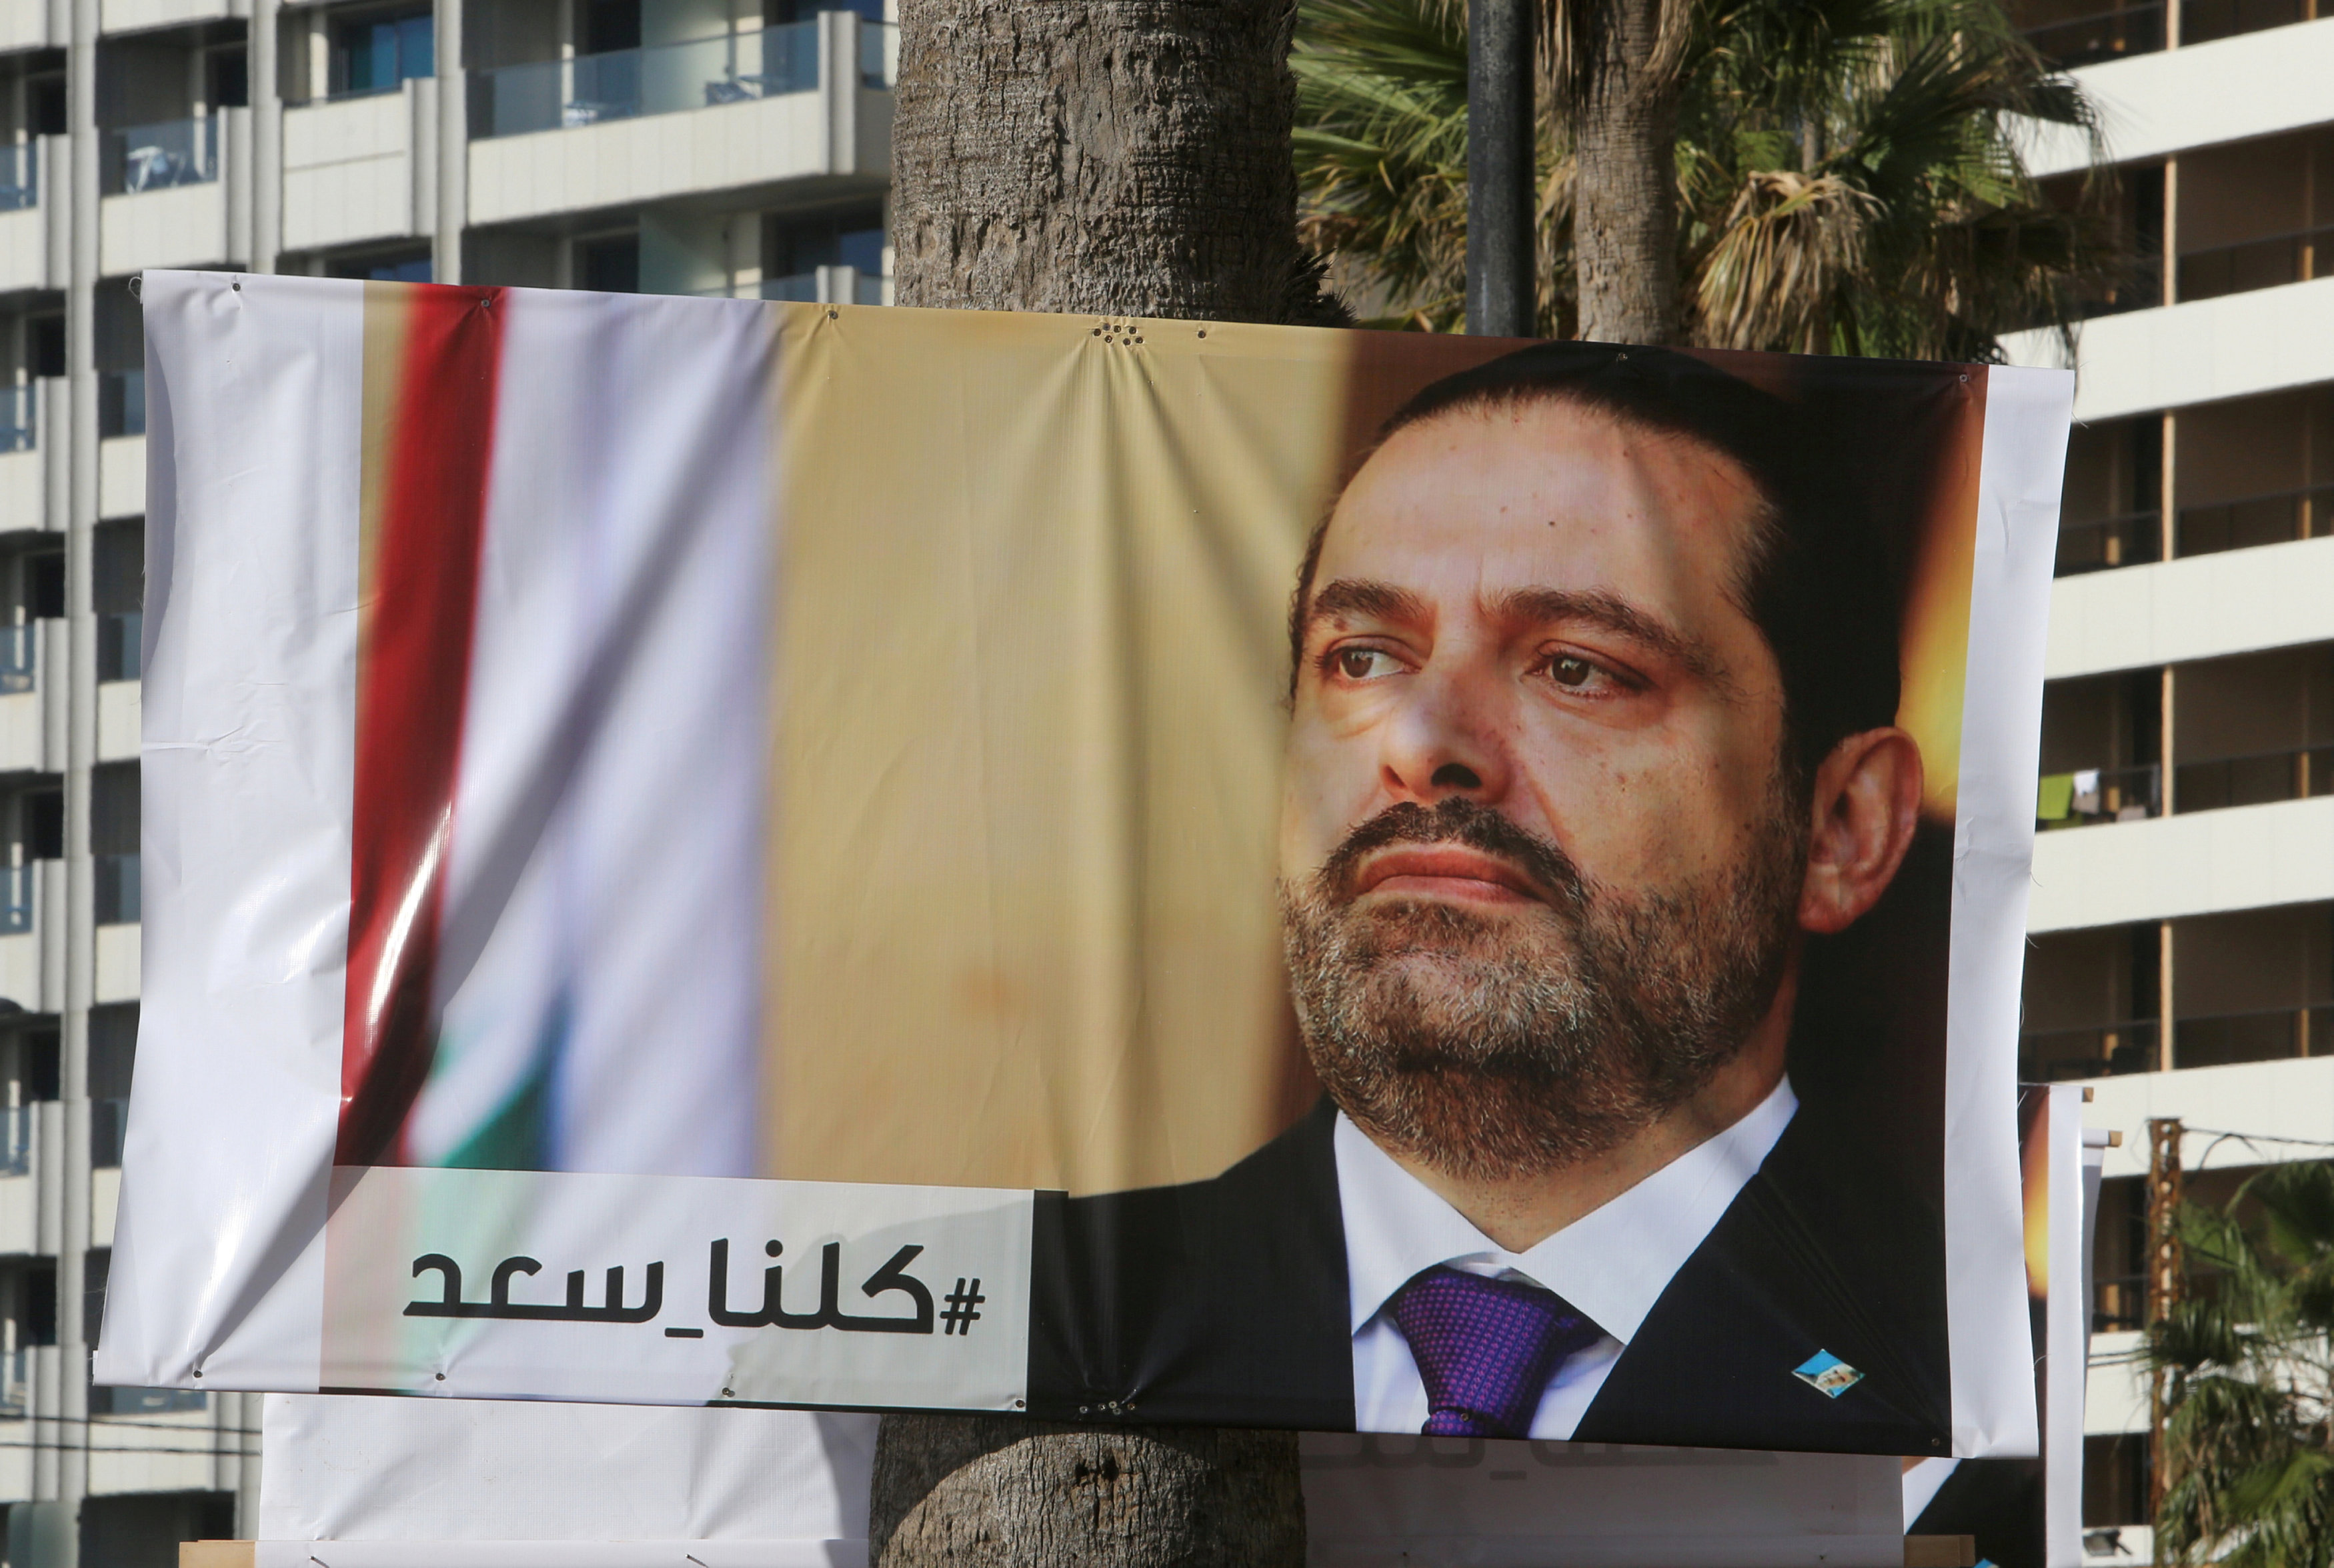 A poster depicting Lebanon's Prime Minister Saad al-Hariri, who has resigned from his post, is seen in Beirut